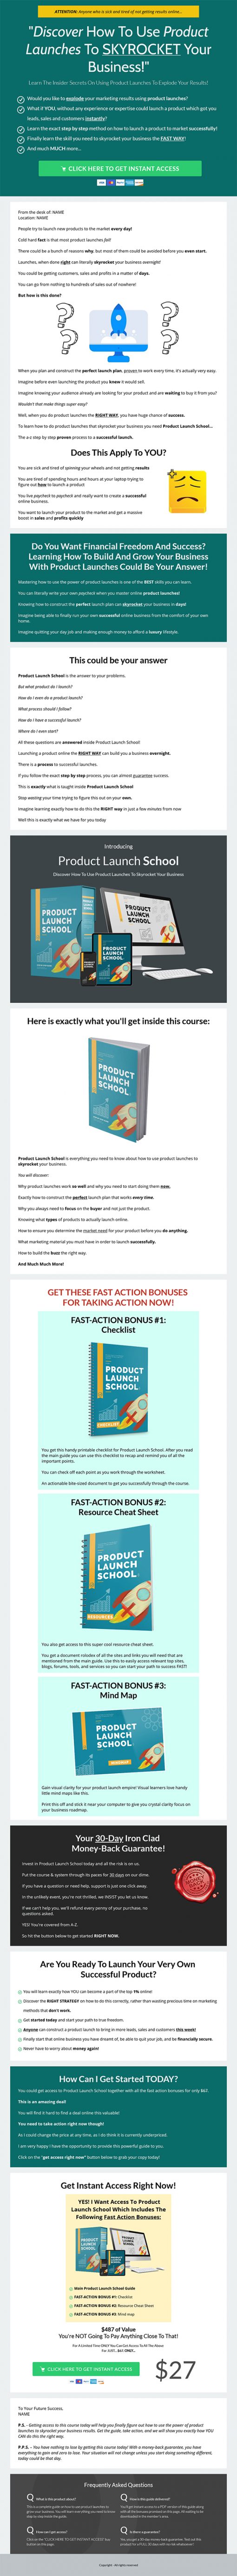 Product Launch School Ebook and Videos MRR